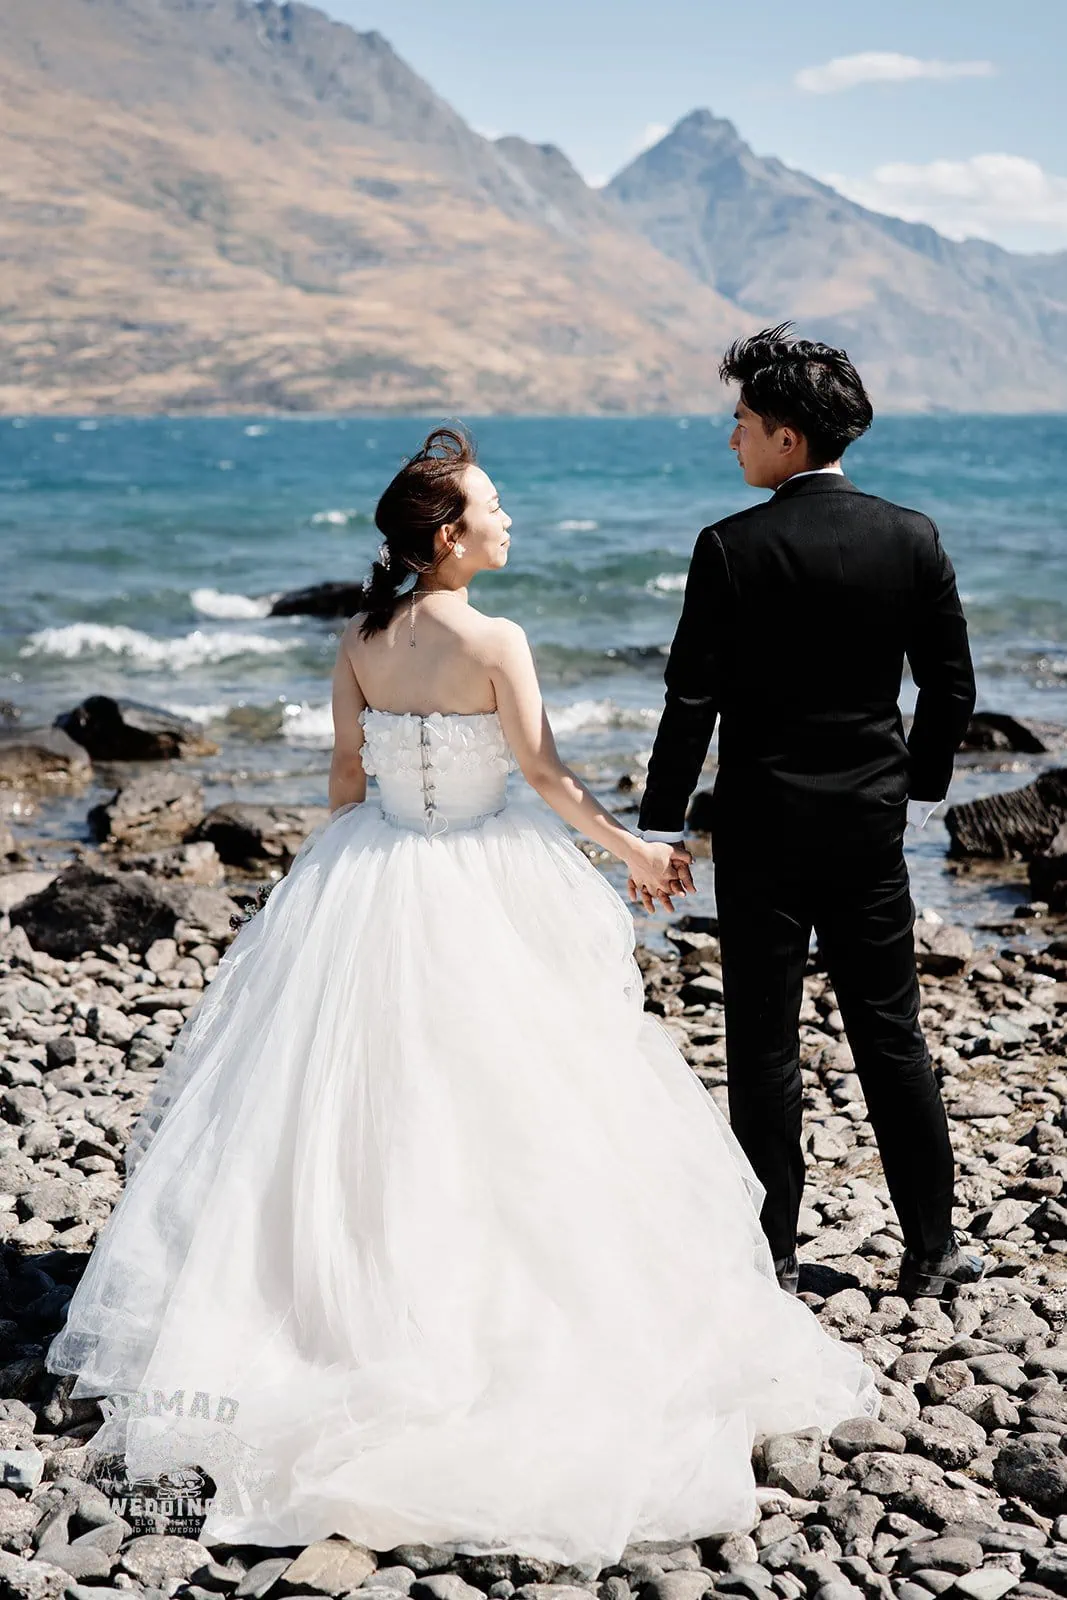 Queenstown New Zealand Elopement Wedding Photographer - A bride and groom are holding hands on a rocky beach in New Zealand for the Summer Edition - Ground Guide to the Seasons in Queenstown.